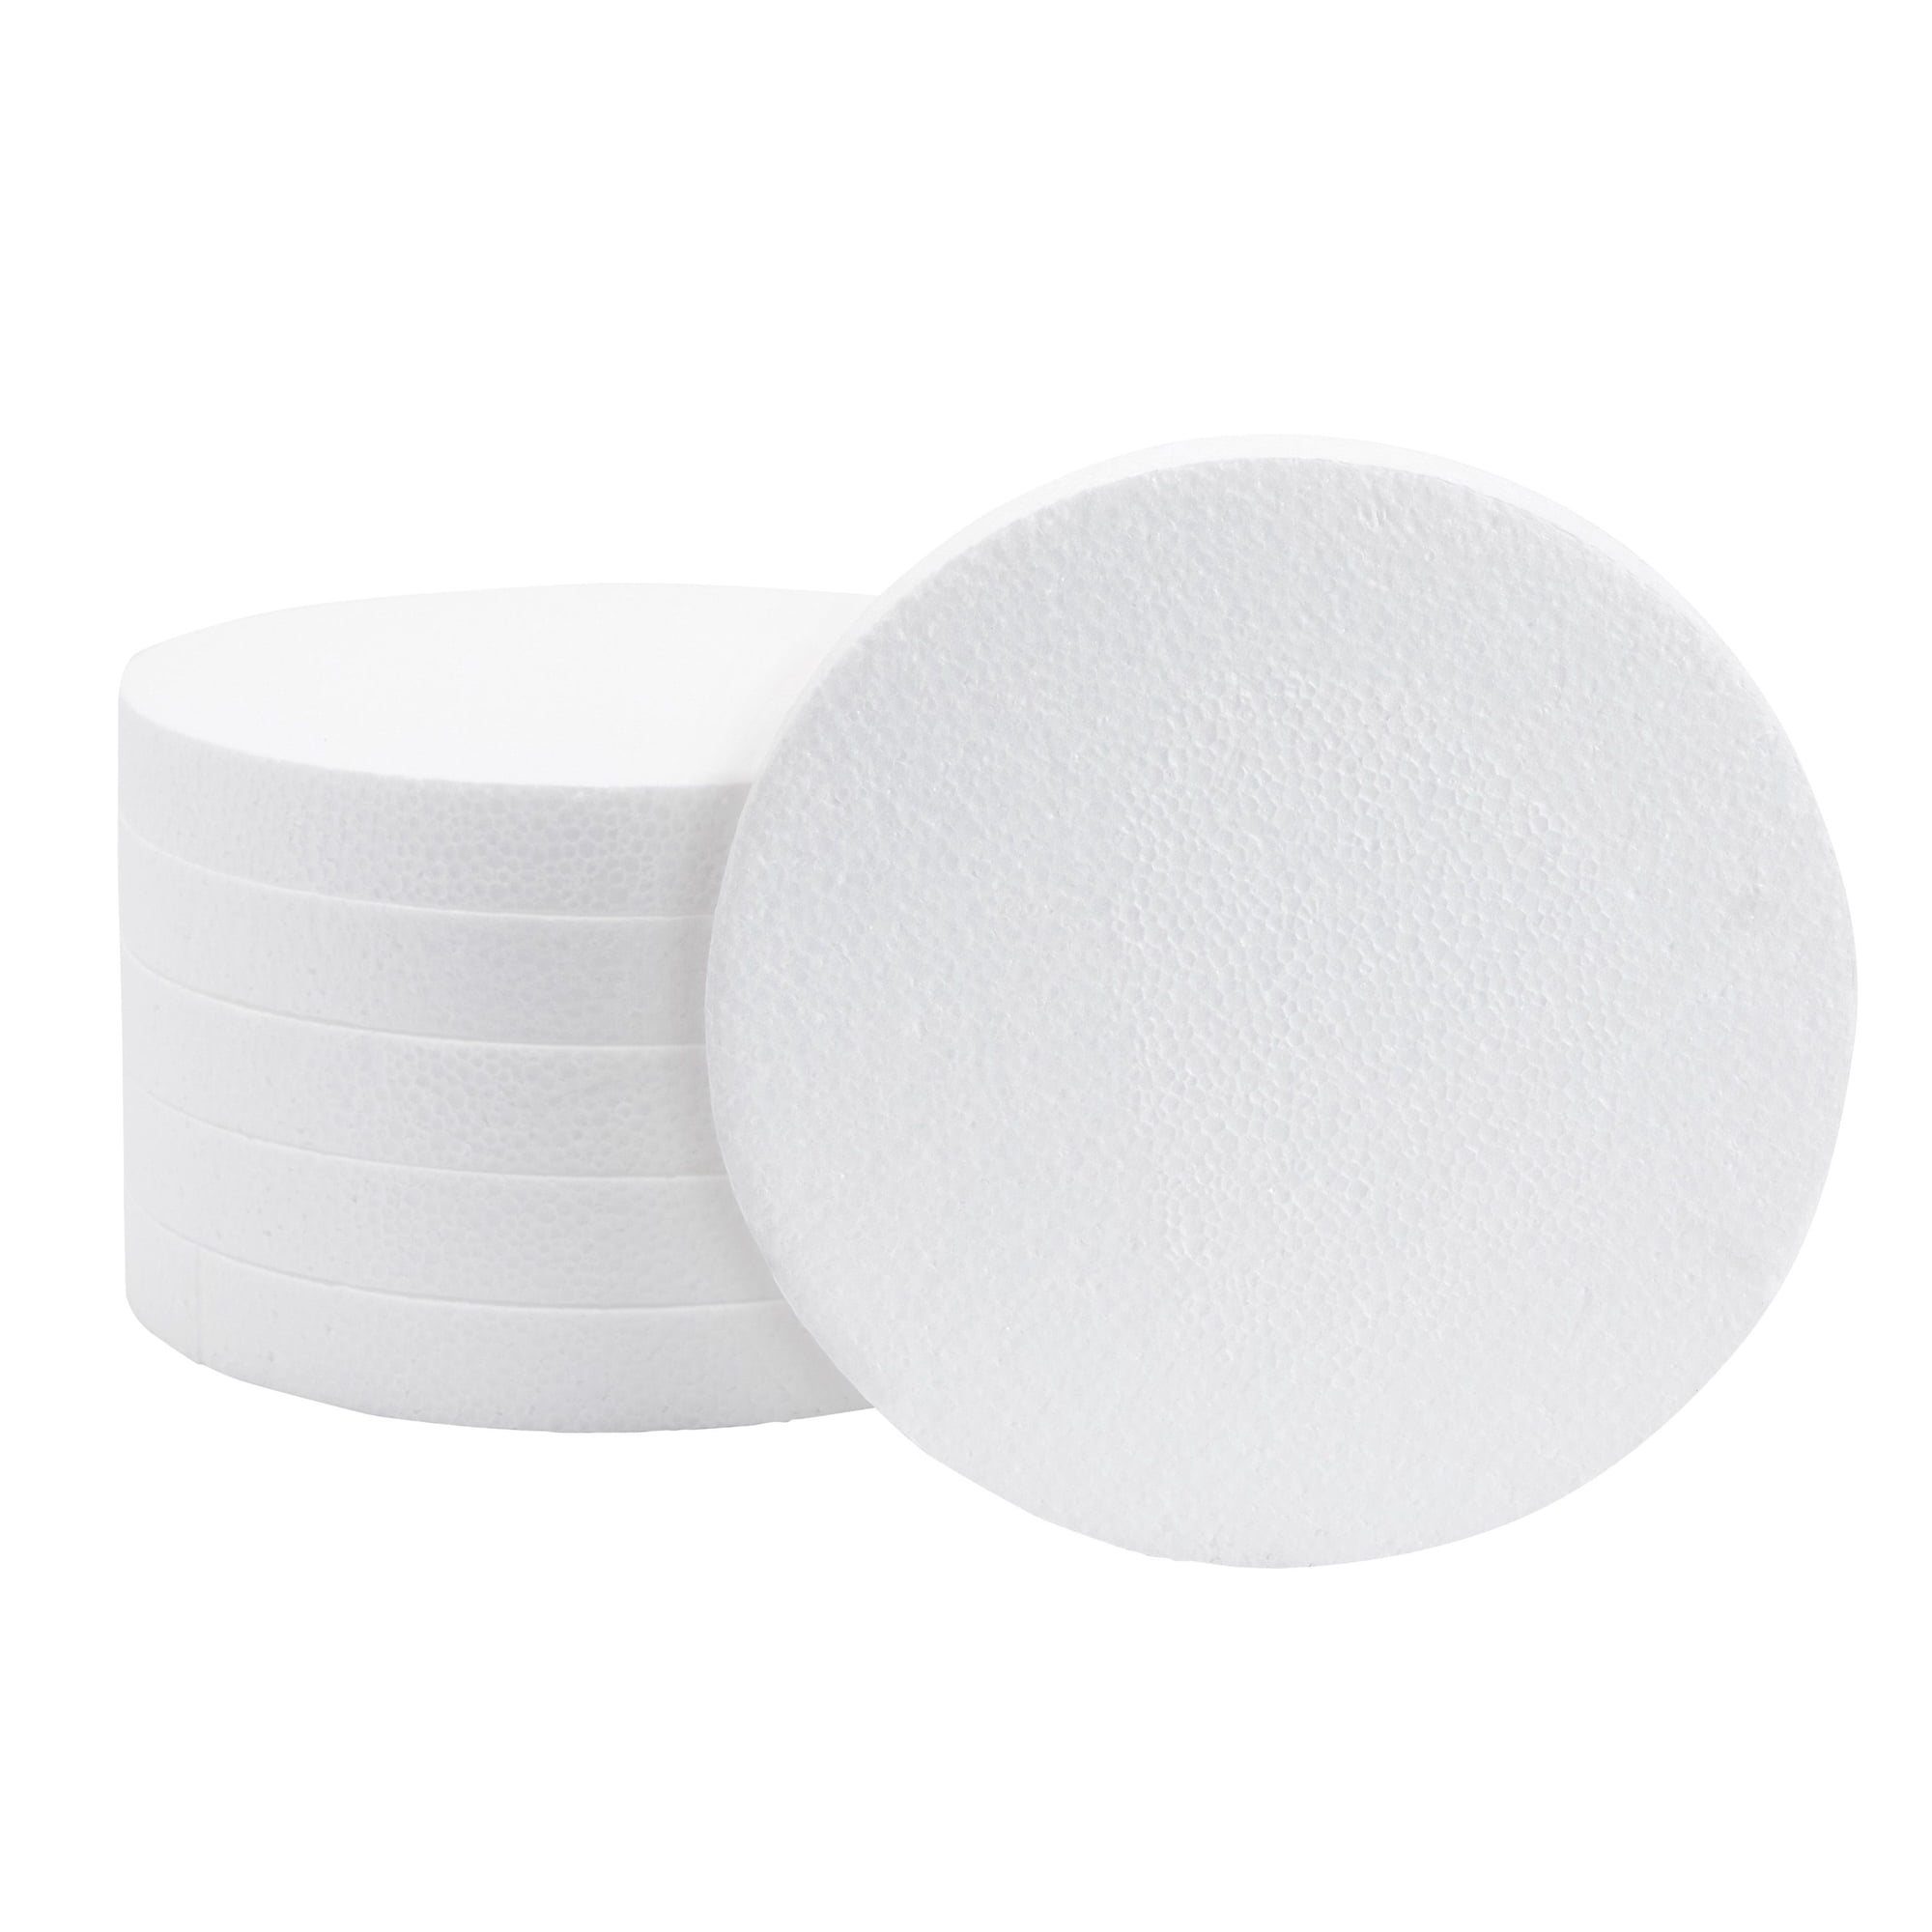 Package of 24 Flat Round 6 Styrofoam Discs for Crafting, Florals, and Proj